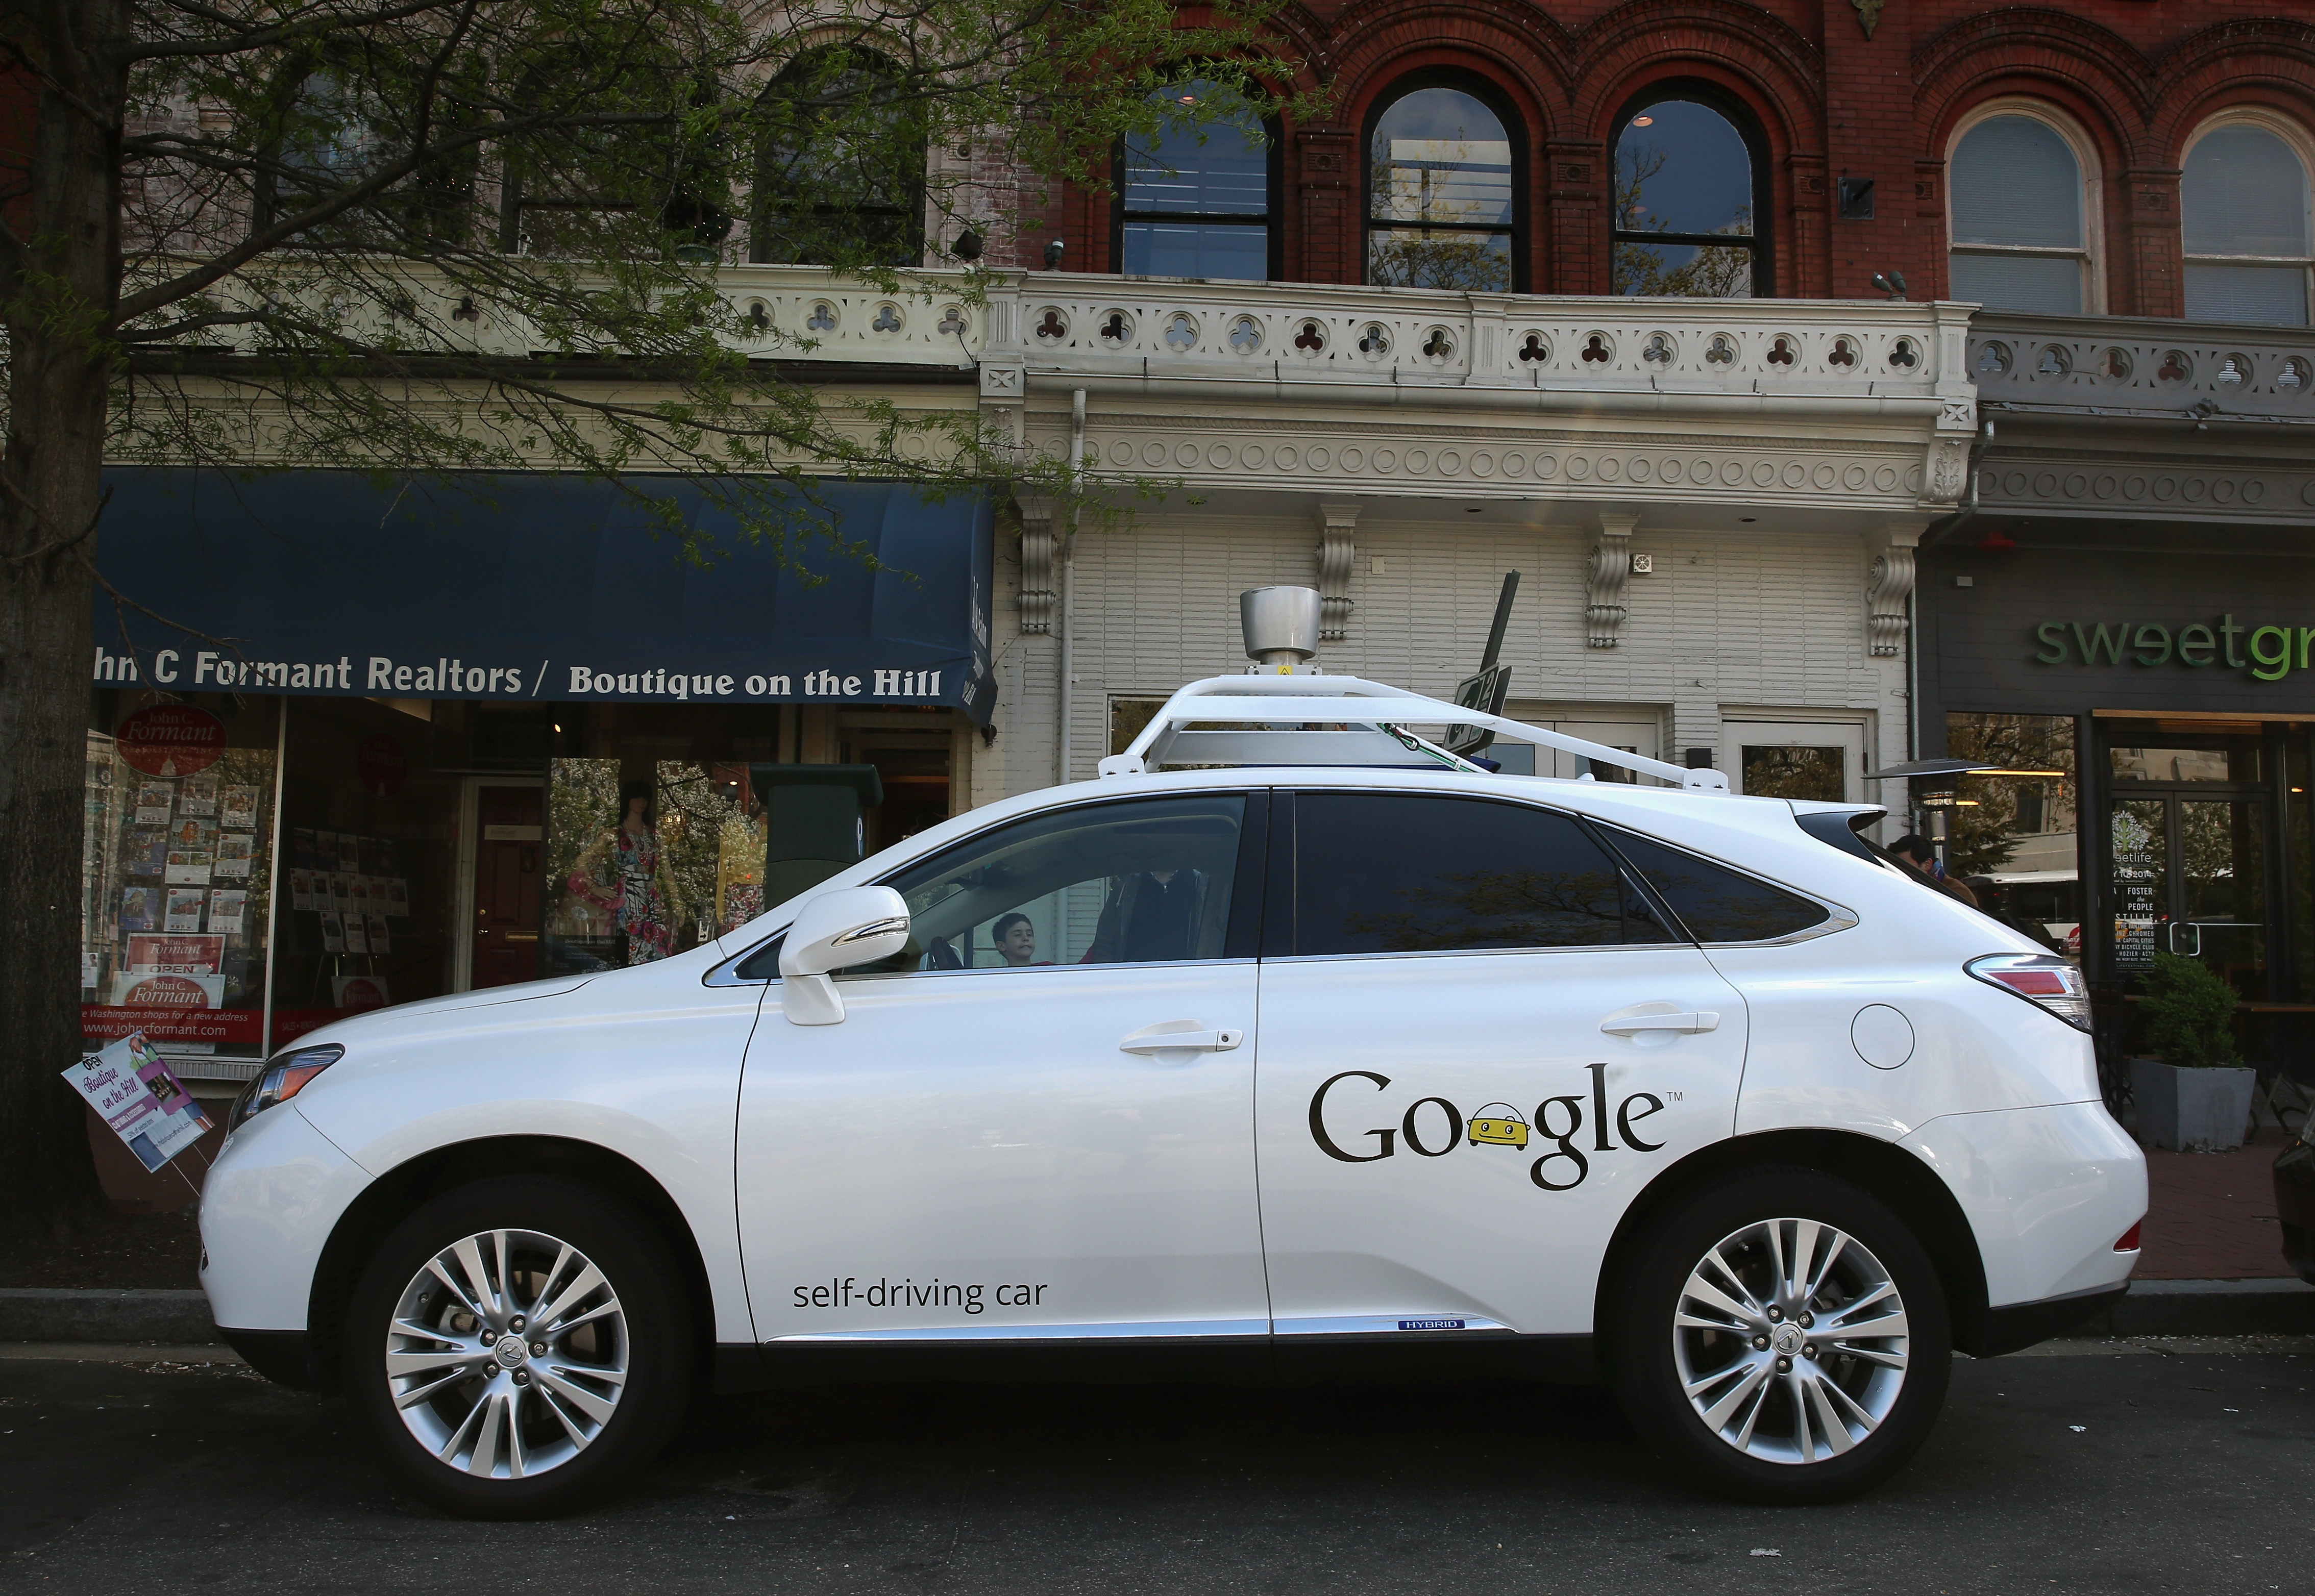 Googles Lexus RX 450H Self Driving Car is seen parked on Pennsylvania Ave. on April 23, 2014 in Washington. (Mark Wilson—Getty Images)